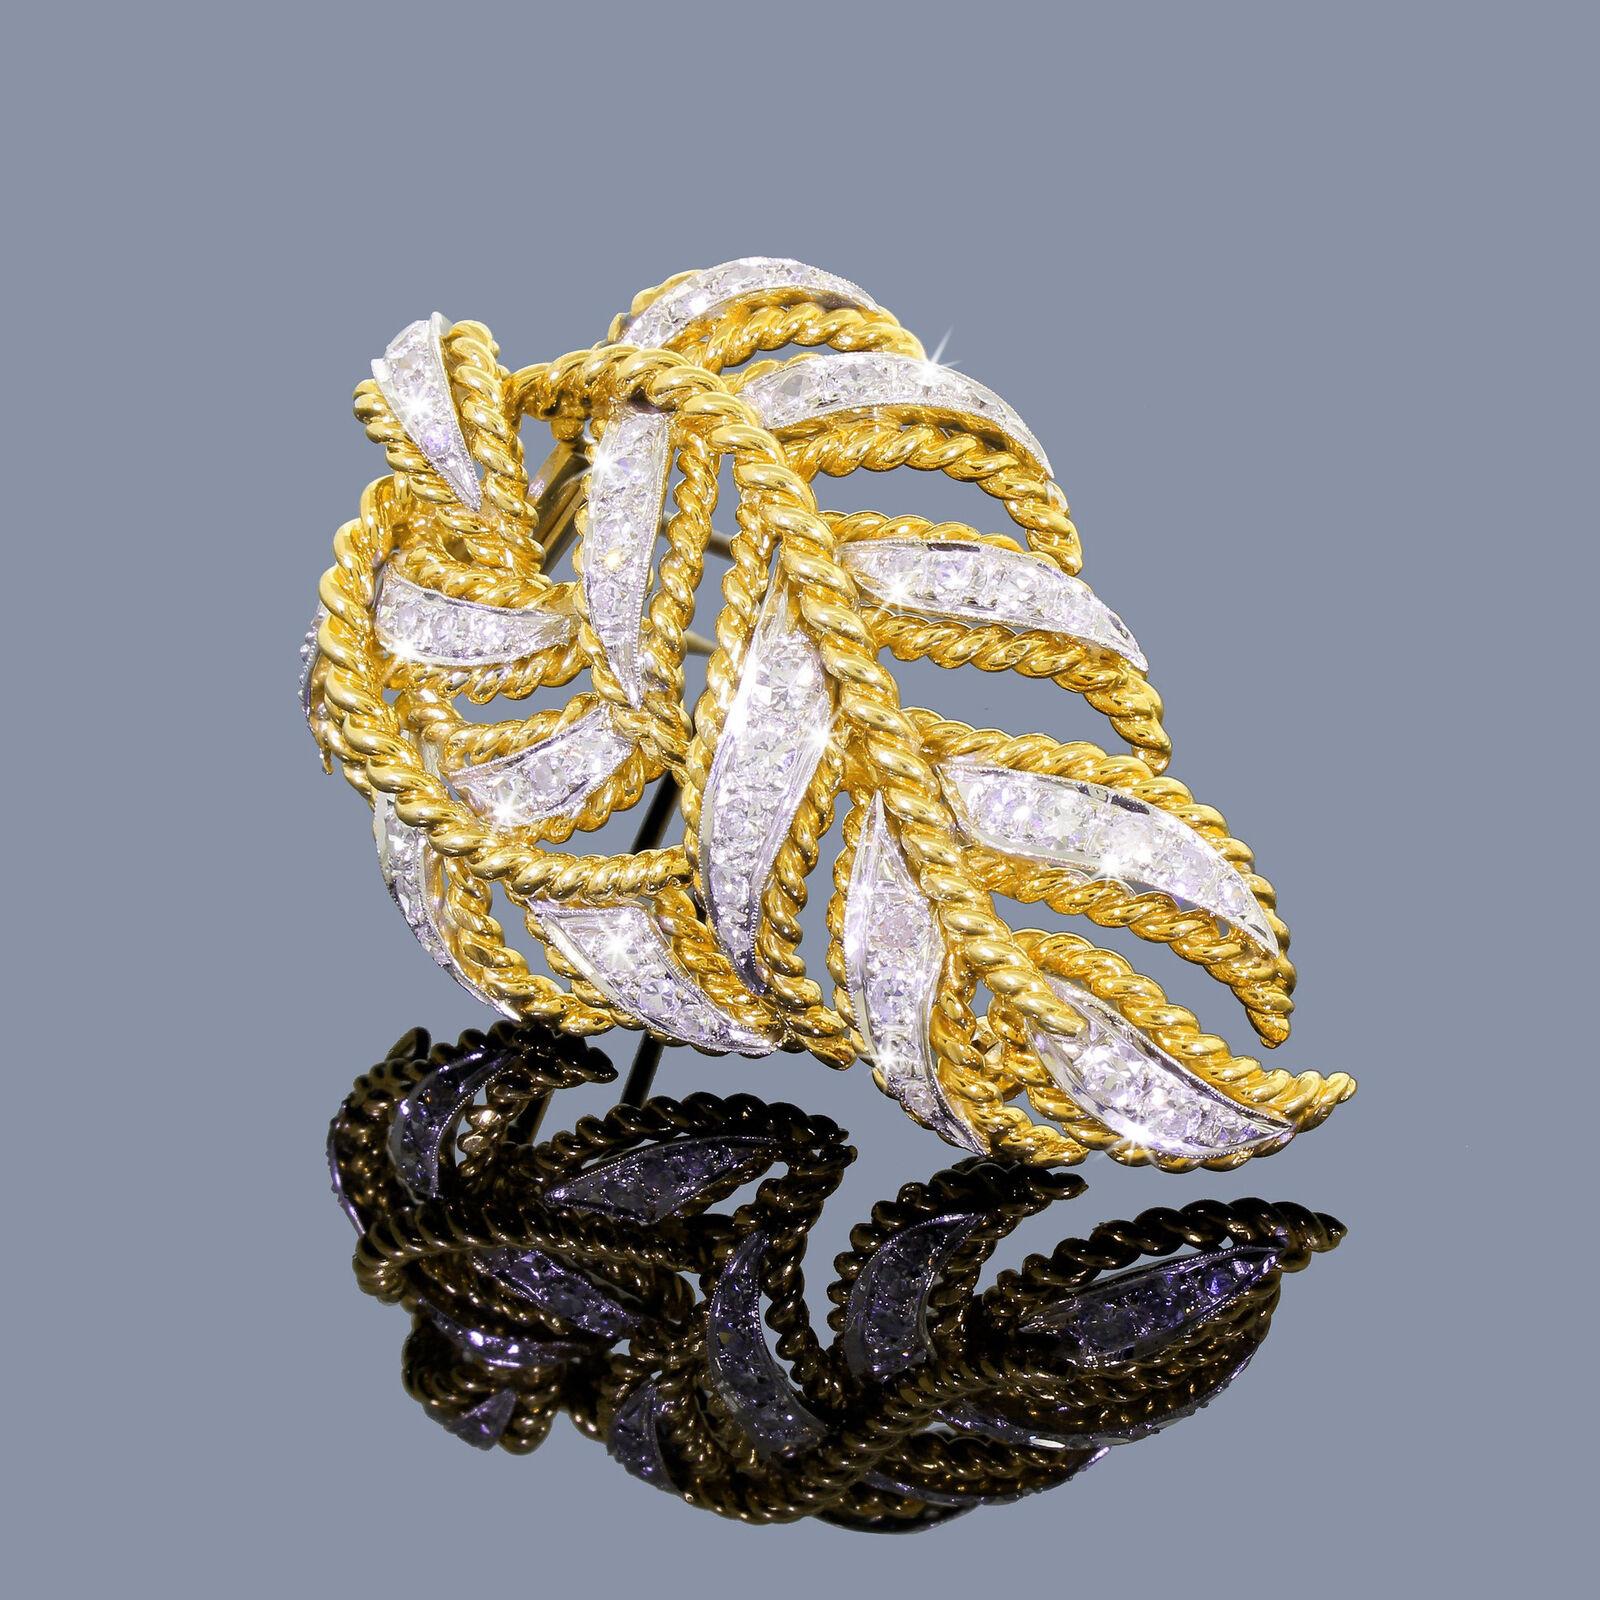 Presenting a dazzling and impressive pave diamond brooch featuring cascading falling leaves on a double branch. Accented with intricate gold spiral wire work, the brilliant cut diamonds are beautifully set in a delicate white gold frame. This